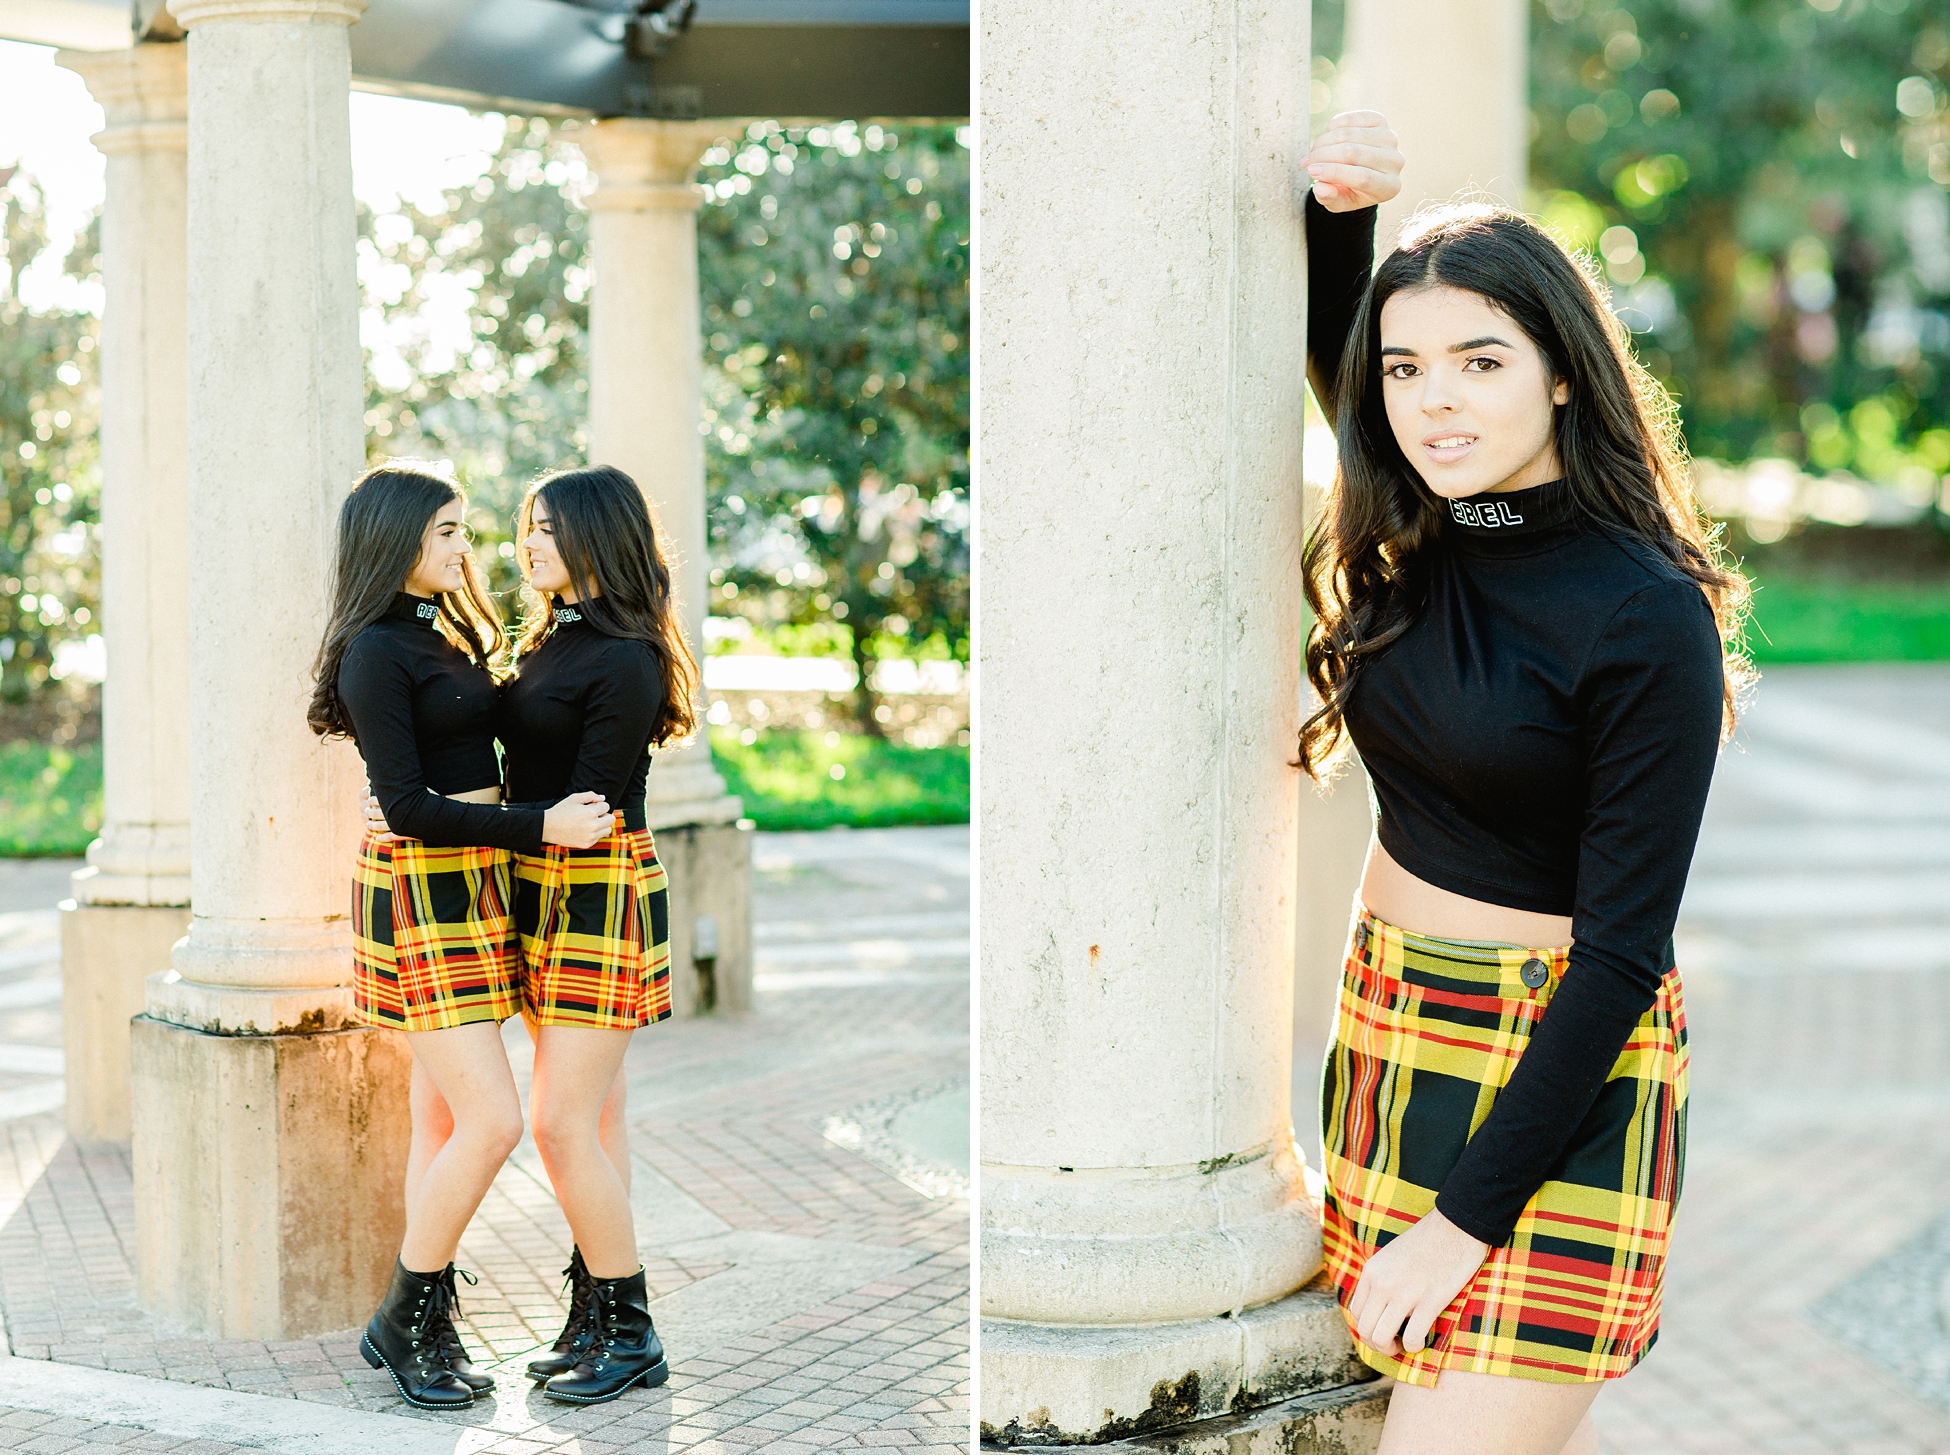 Twin Senior Session | © Ailyn La Torre Photography 2019